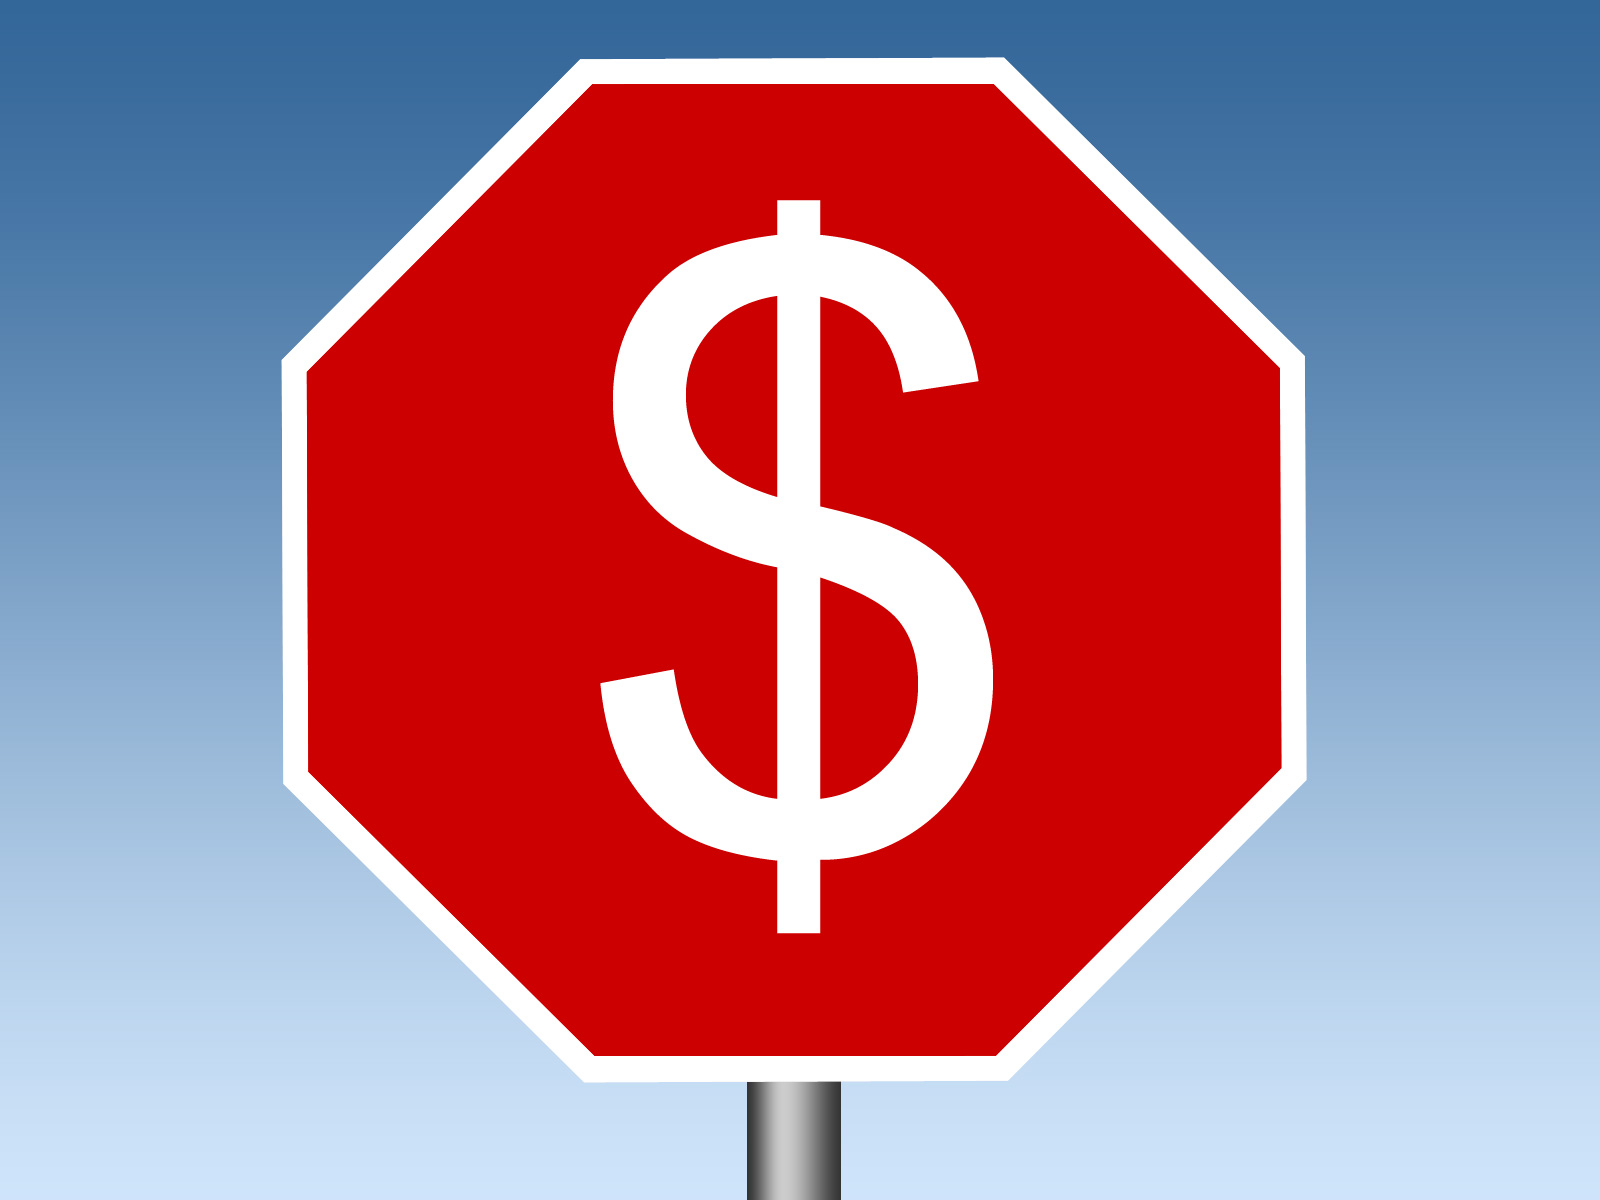 Dollar on a traffic stop sign